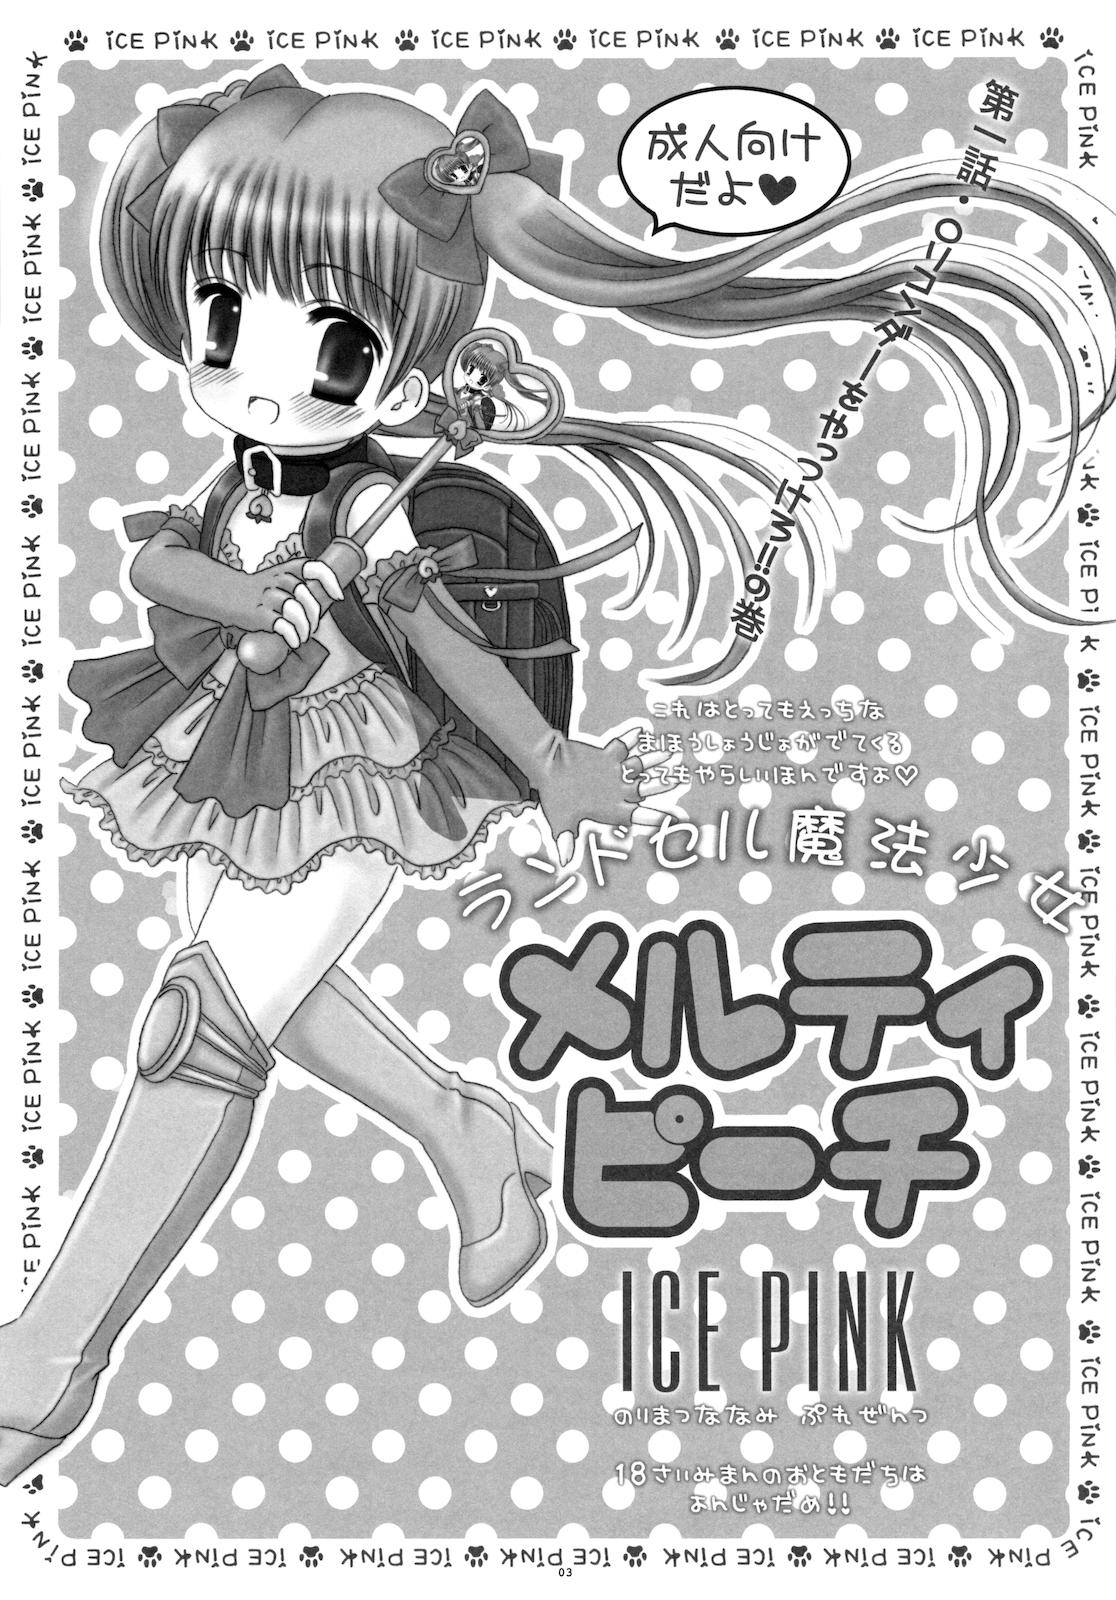 Best Blow Jobs Ever Round Shell Mahou Shoujo Melty Peach Price - Page 5